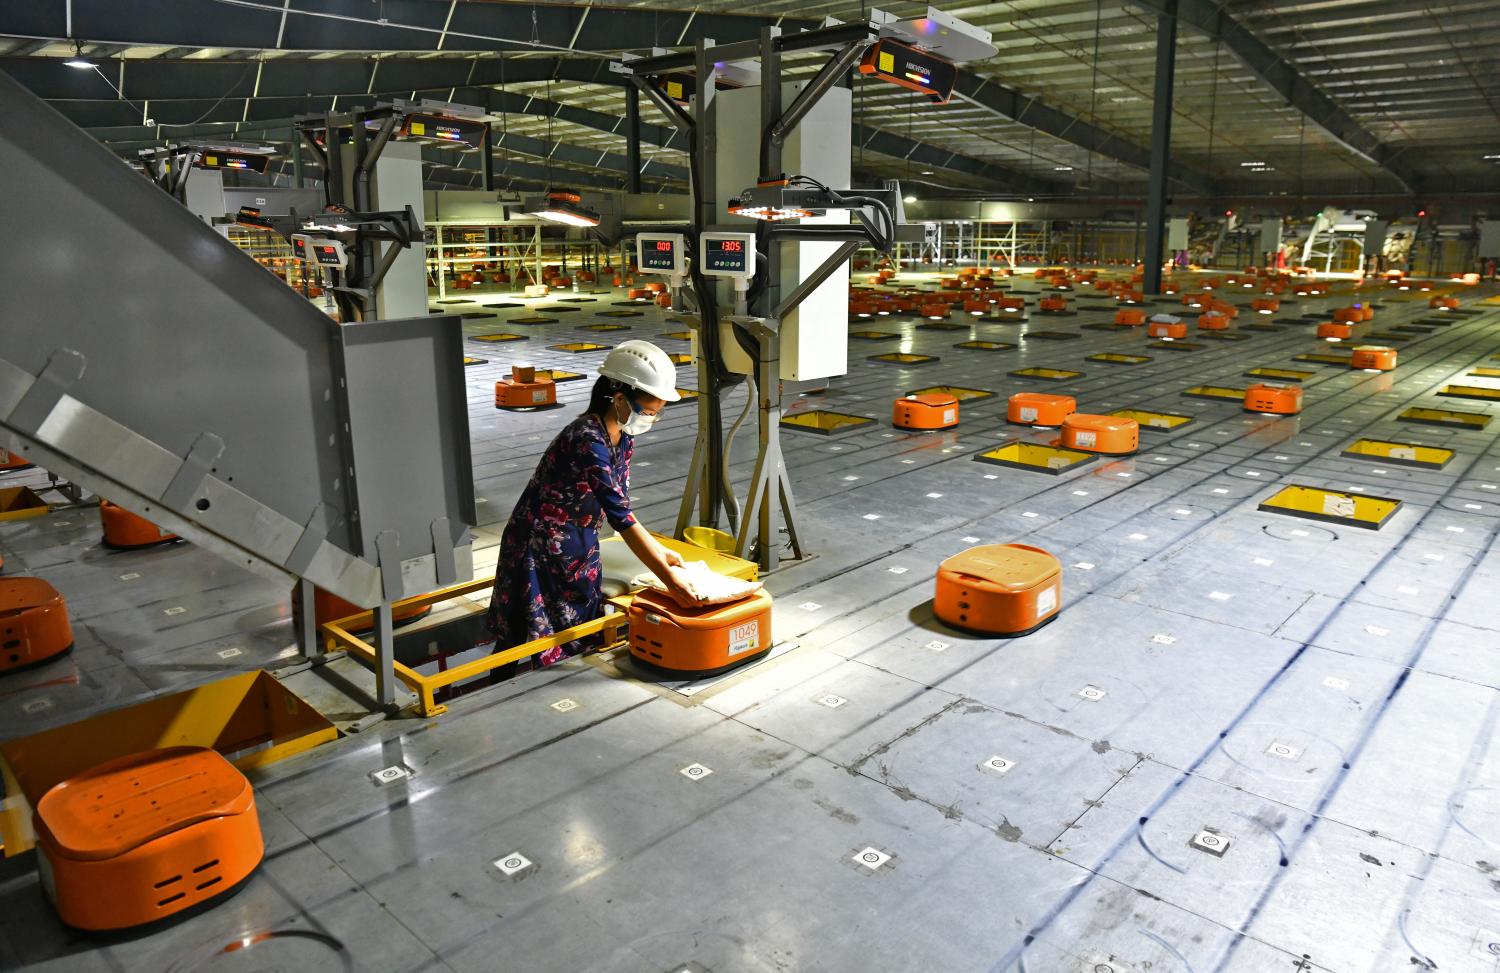 A worker stands in a large warehouse space, using small automated vehicles to sort items.